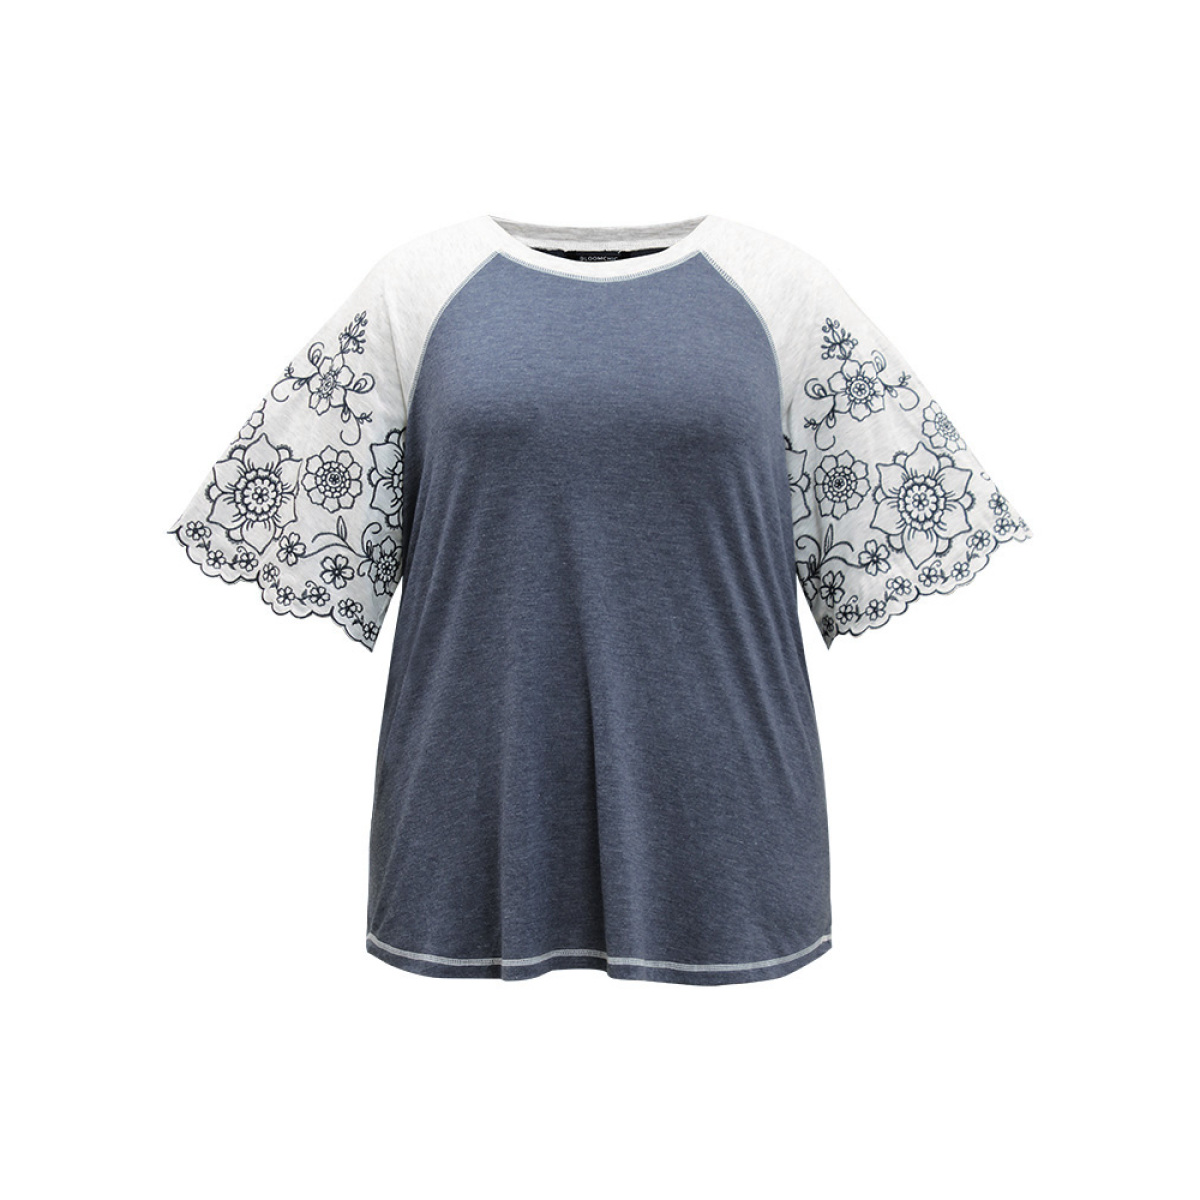 

Plus Size Contrast Embroidered Scalloped Trim T-shirt Indigo Women Elegant Contrast Silhouette Floral Print Round Neck Dailywear T-shirts BloomChic